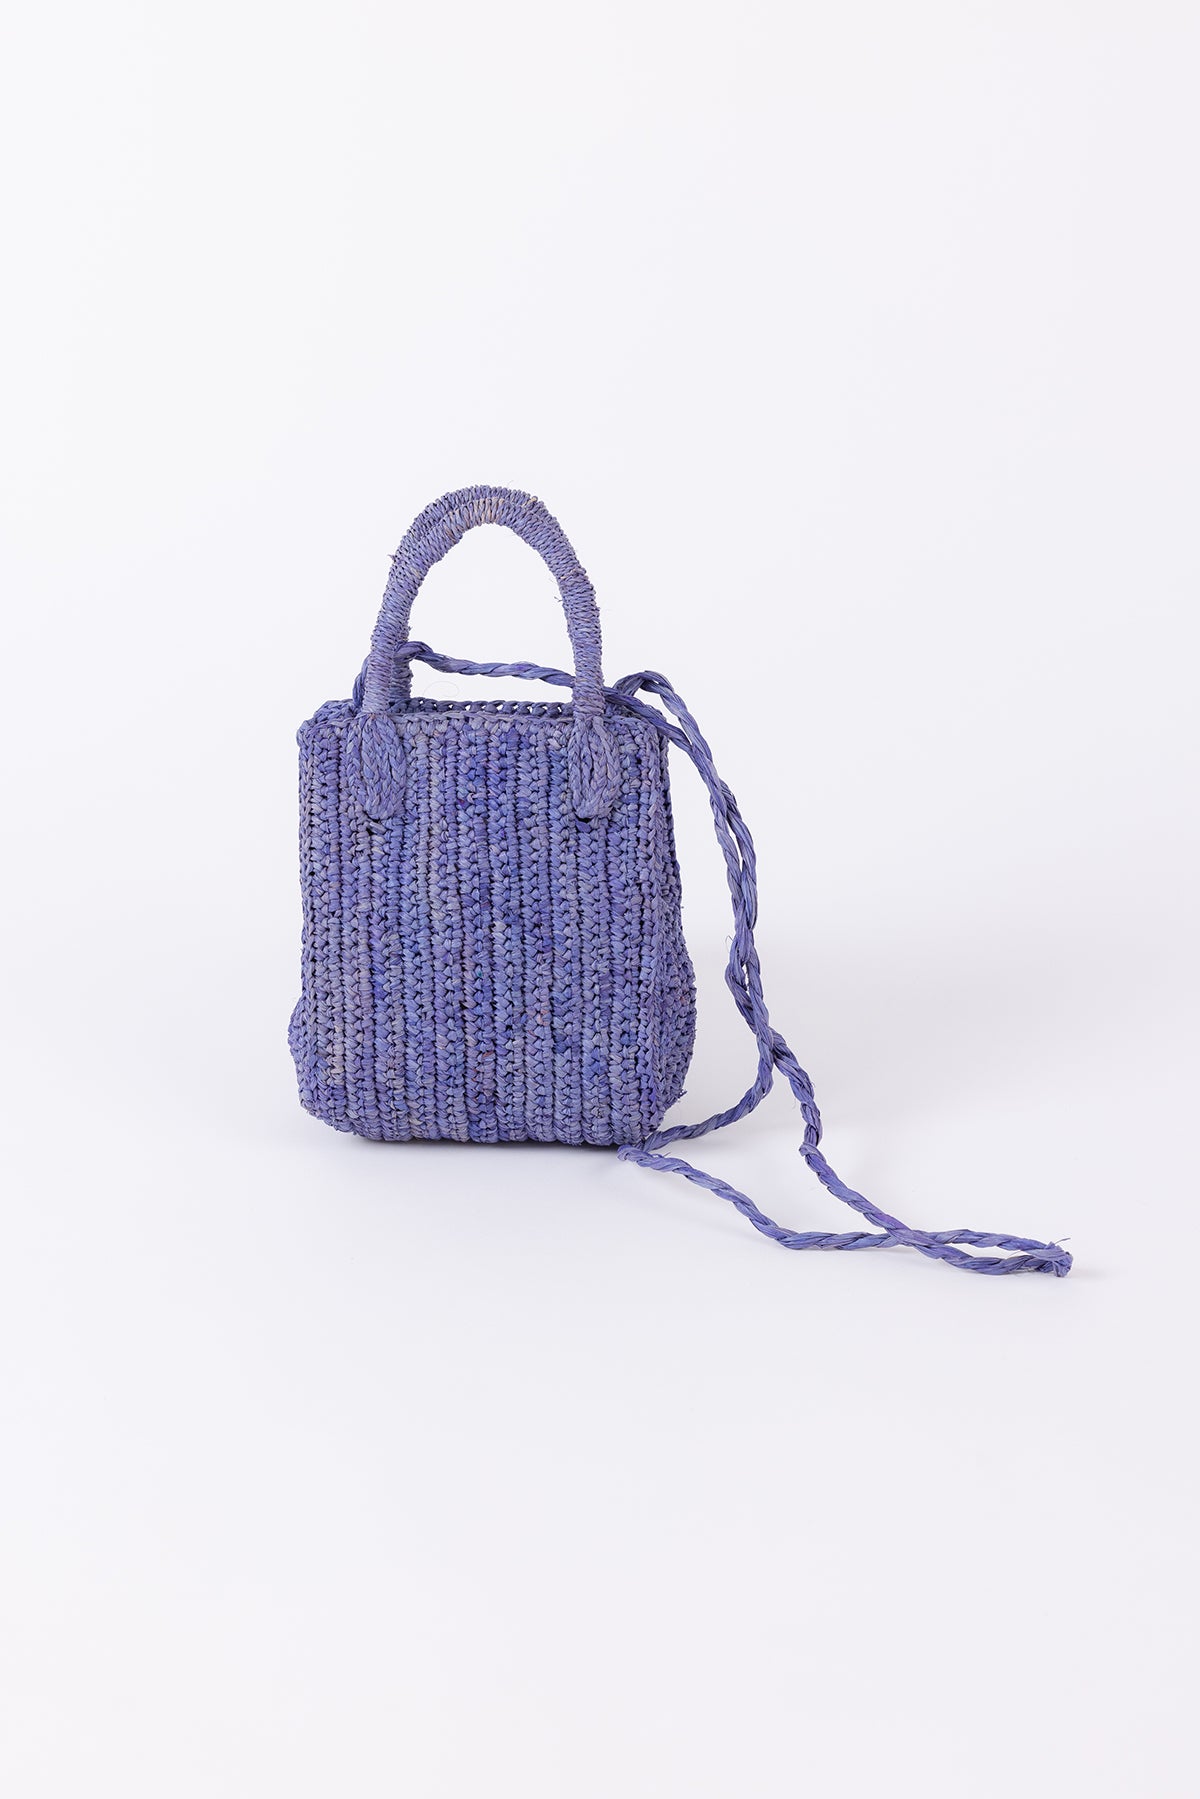 Knitted purple MIMI RAFFIA CROSSBODY bag with a single handle displayed against a white background by Velvet by Graham & Spencer.-26047808012481